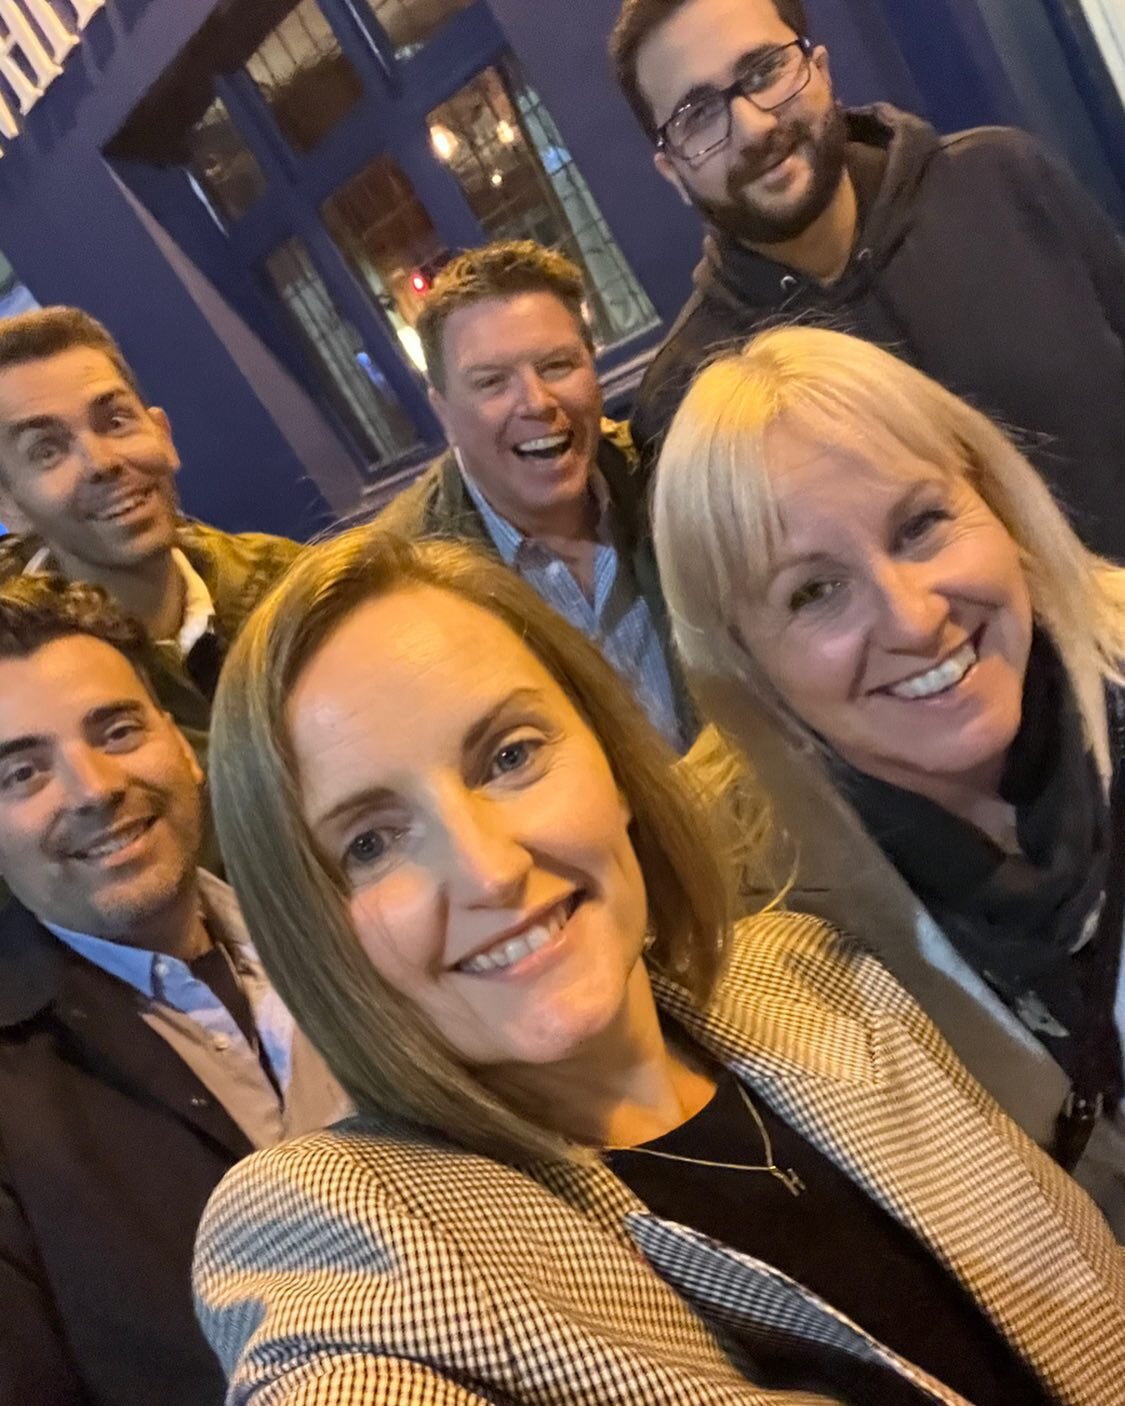 Great night with the team tonight! So great to finally be able to get together and socialise! From Spain to Southsea, Hagley to Sileby we are all committed to spending quality time together! #team #smallbusiness #wellbeing #happy